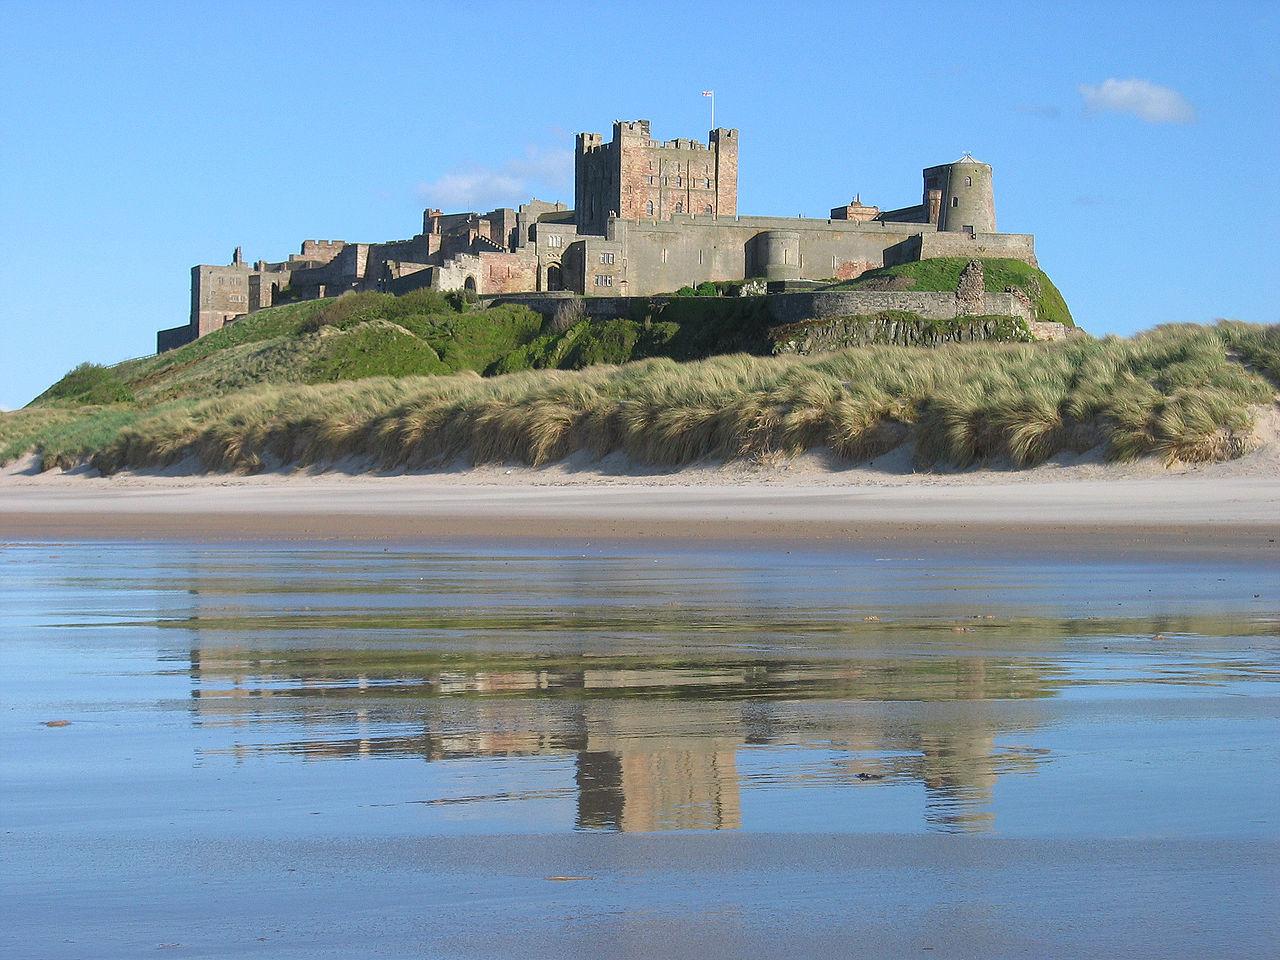 Bamburgh beach is flanked by a castle